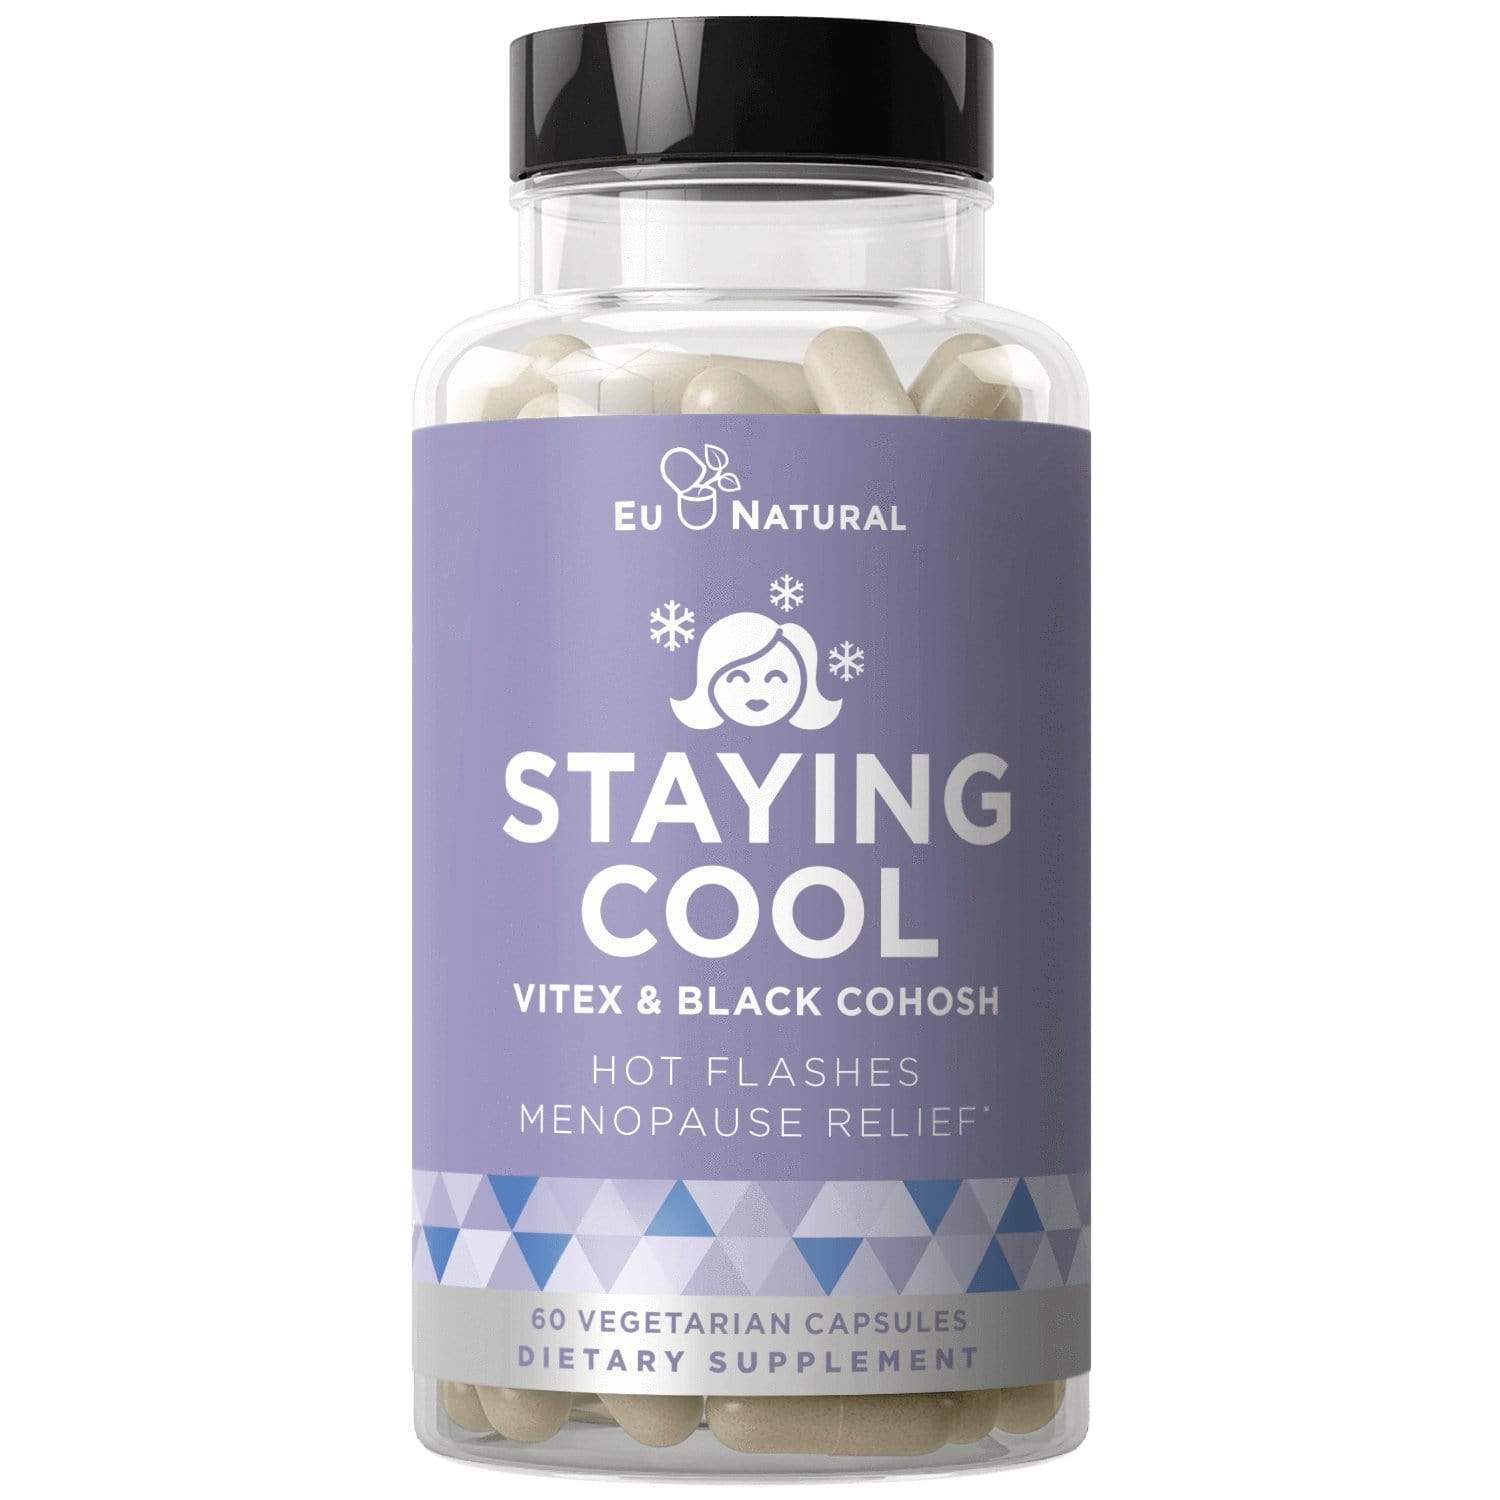 Eu Natural STAYING COOL Hot Flashes & Menopause Relief